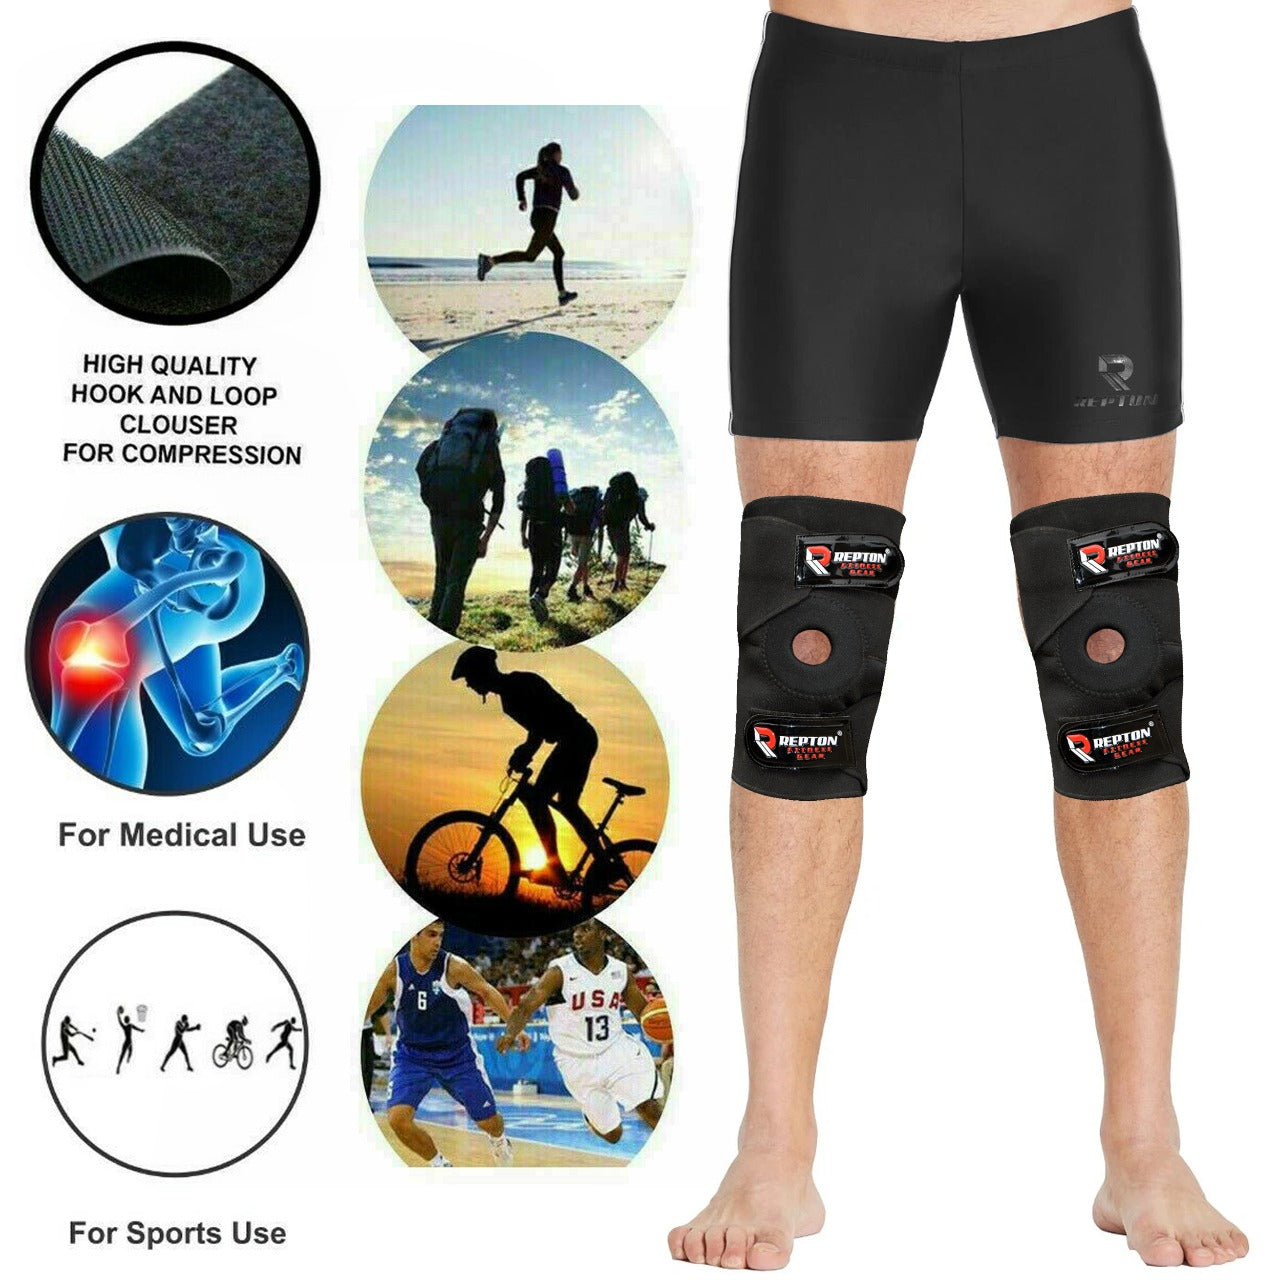 Knee Support Patella Brace Repton Fitness and Boxing Gears